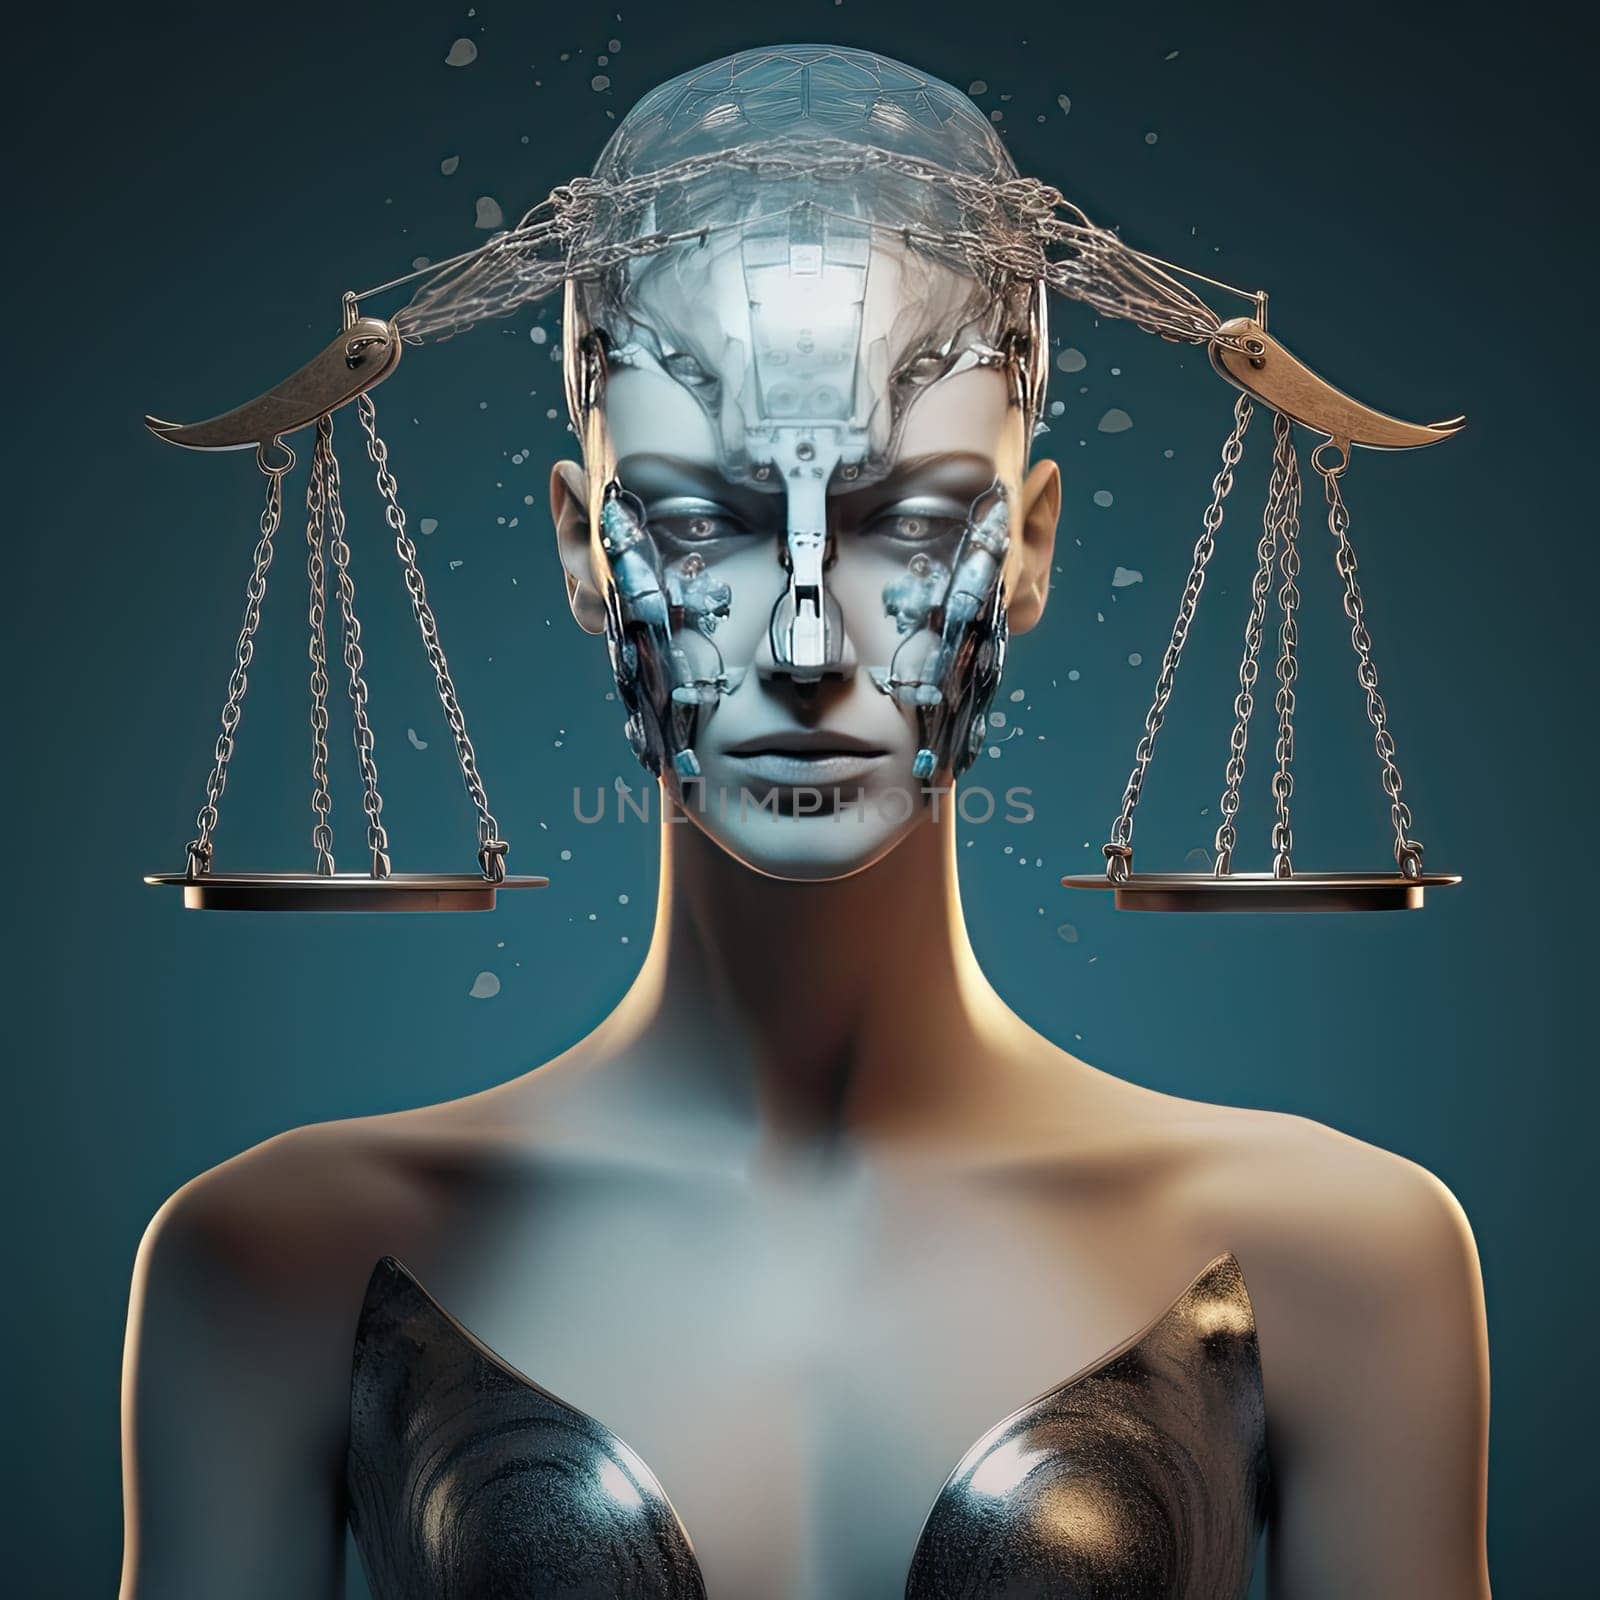 AI and Ethics Law Regulation Artificial Intelligence Robot Hand Illustration Concept Technology Moral and Legal Policy.